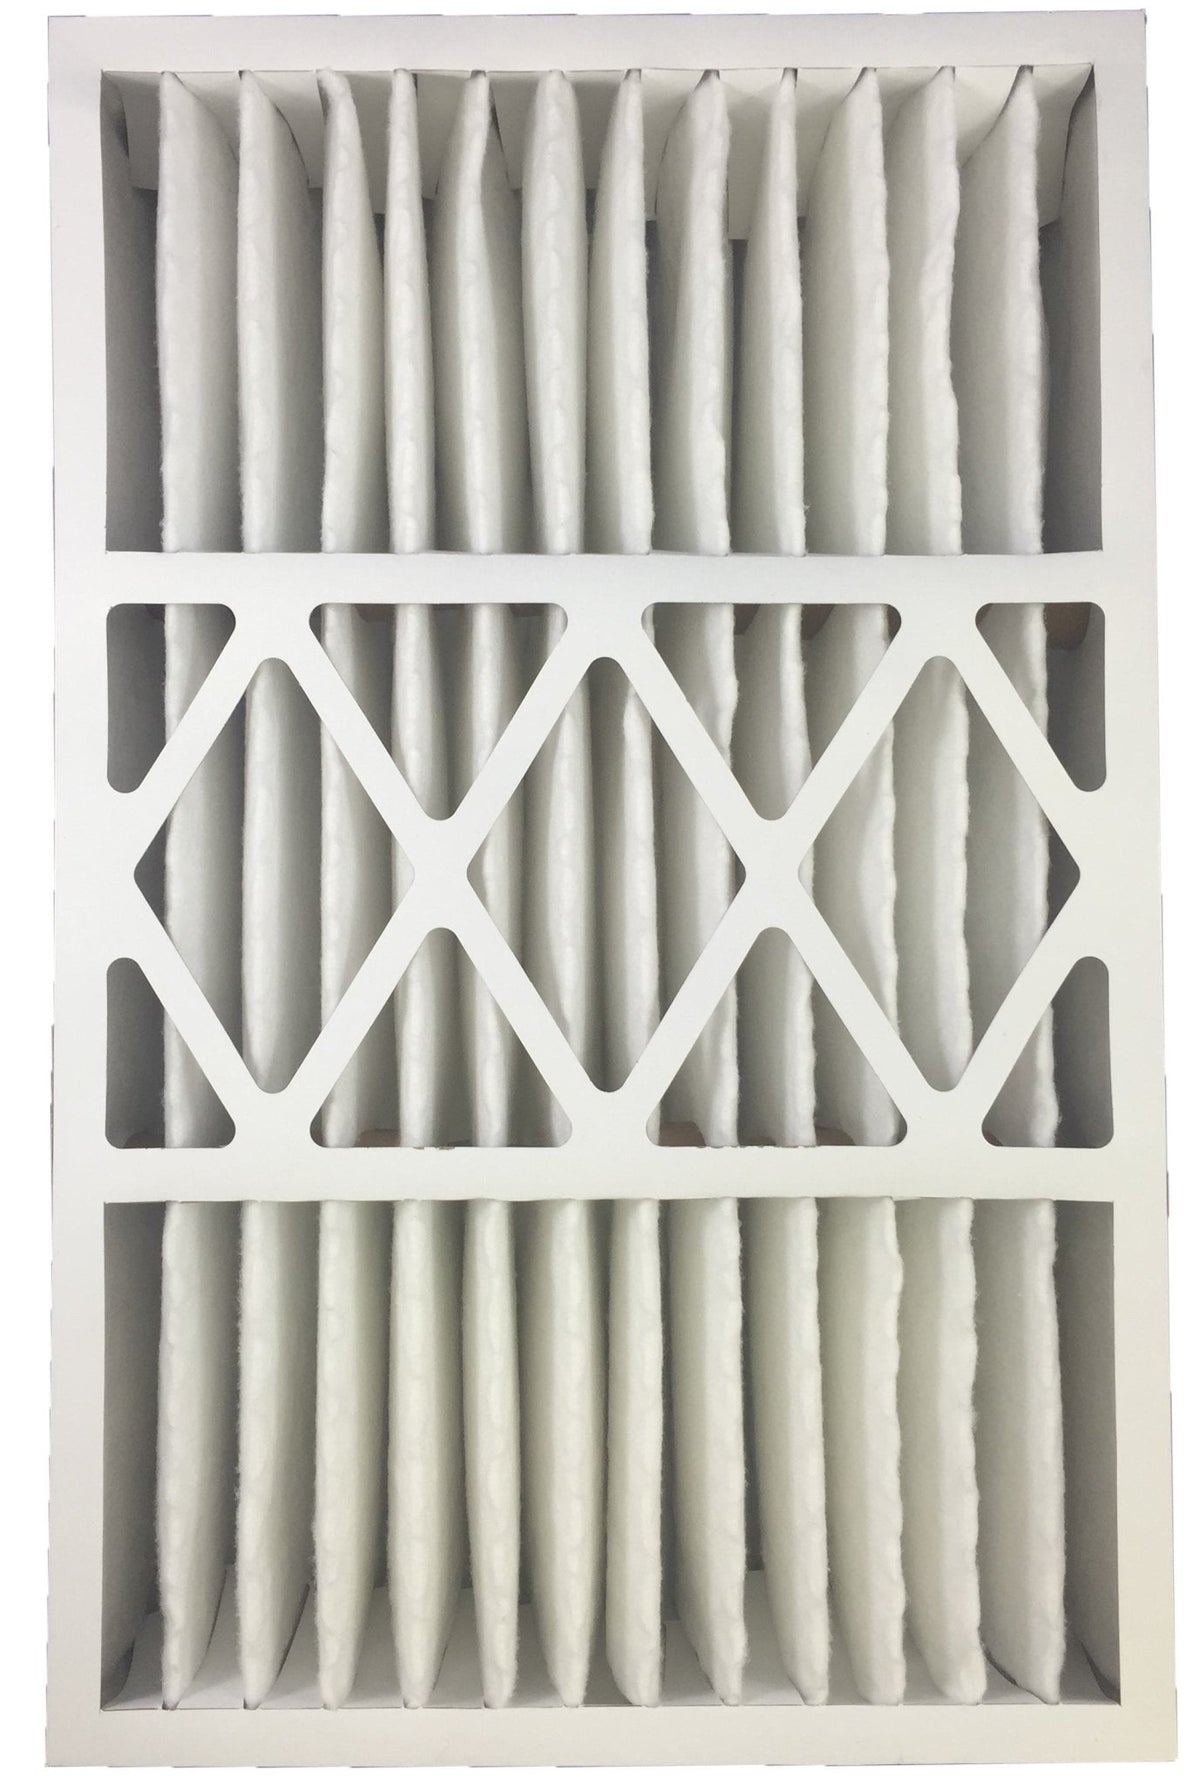 Atomic EXPXXFIL0016 16x25x5 Carrier Replacement MERV 11 Air Filter - 2 Pack